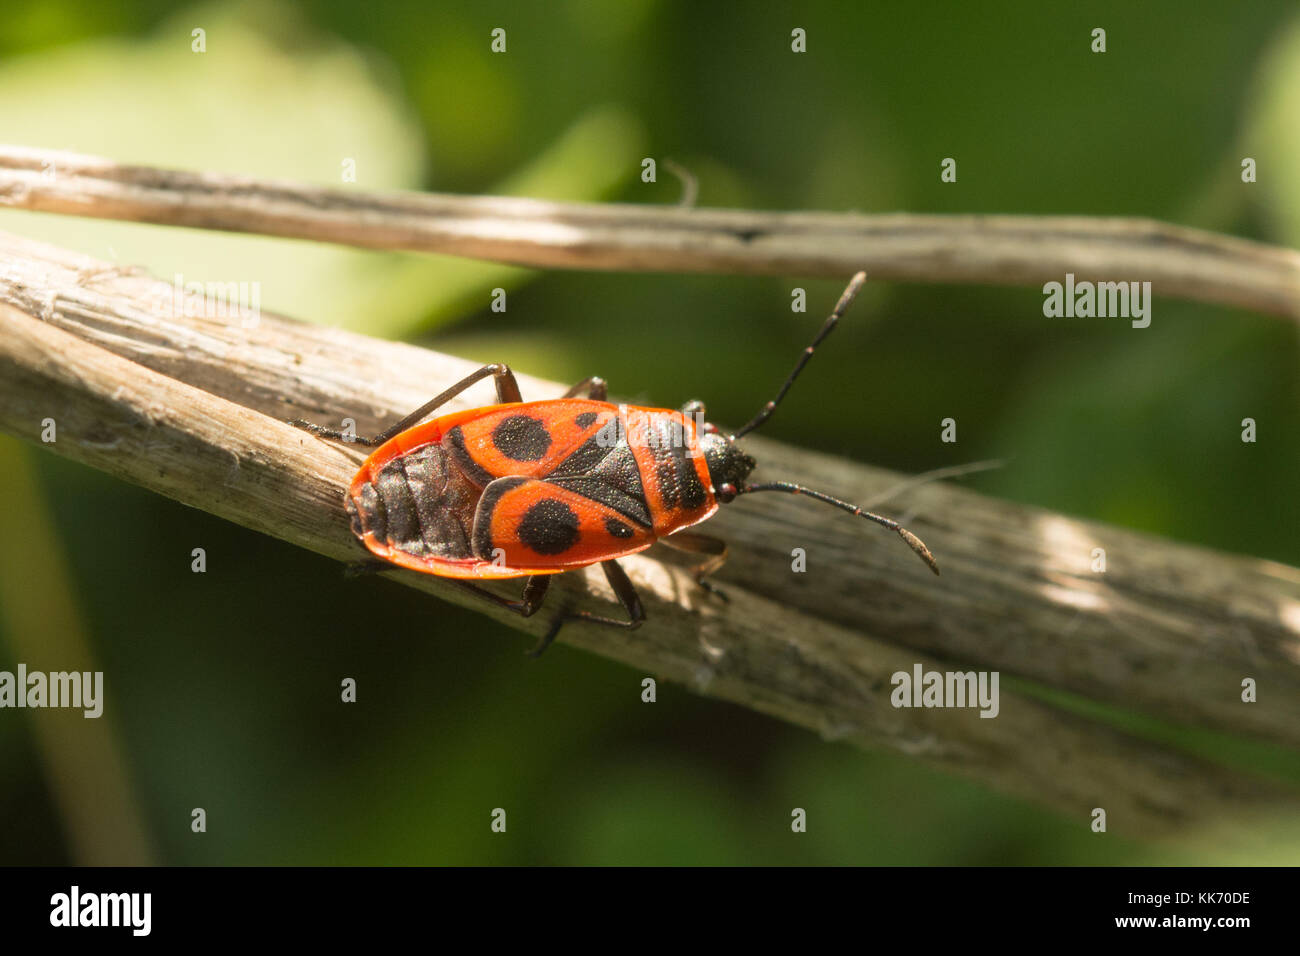 A red and black firebug insect (Pyrrhocoris apterus) on vegetation in Cyprus, Europe Stock Photo